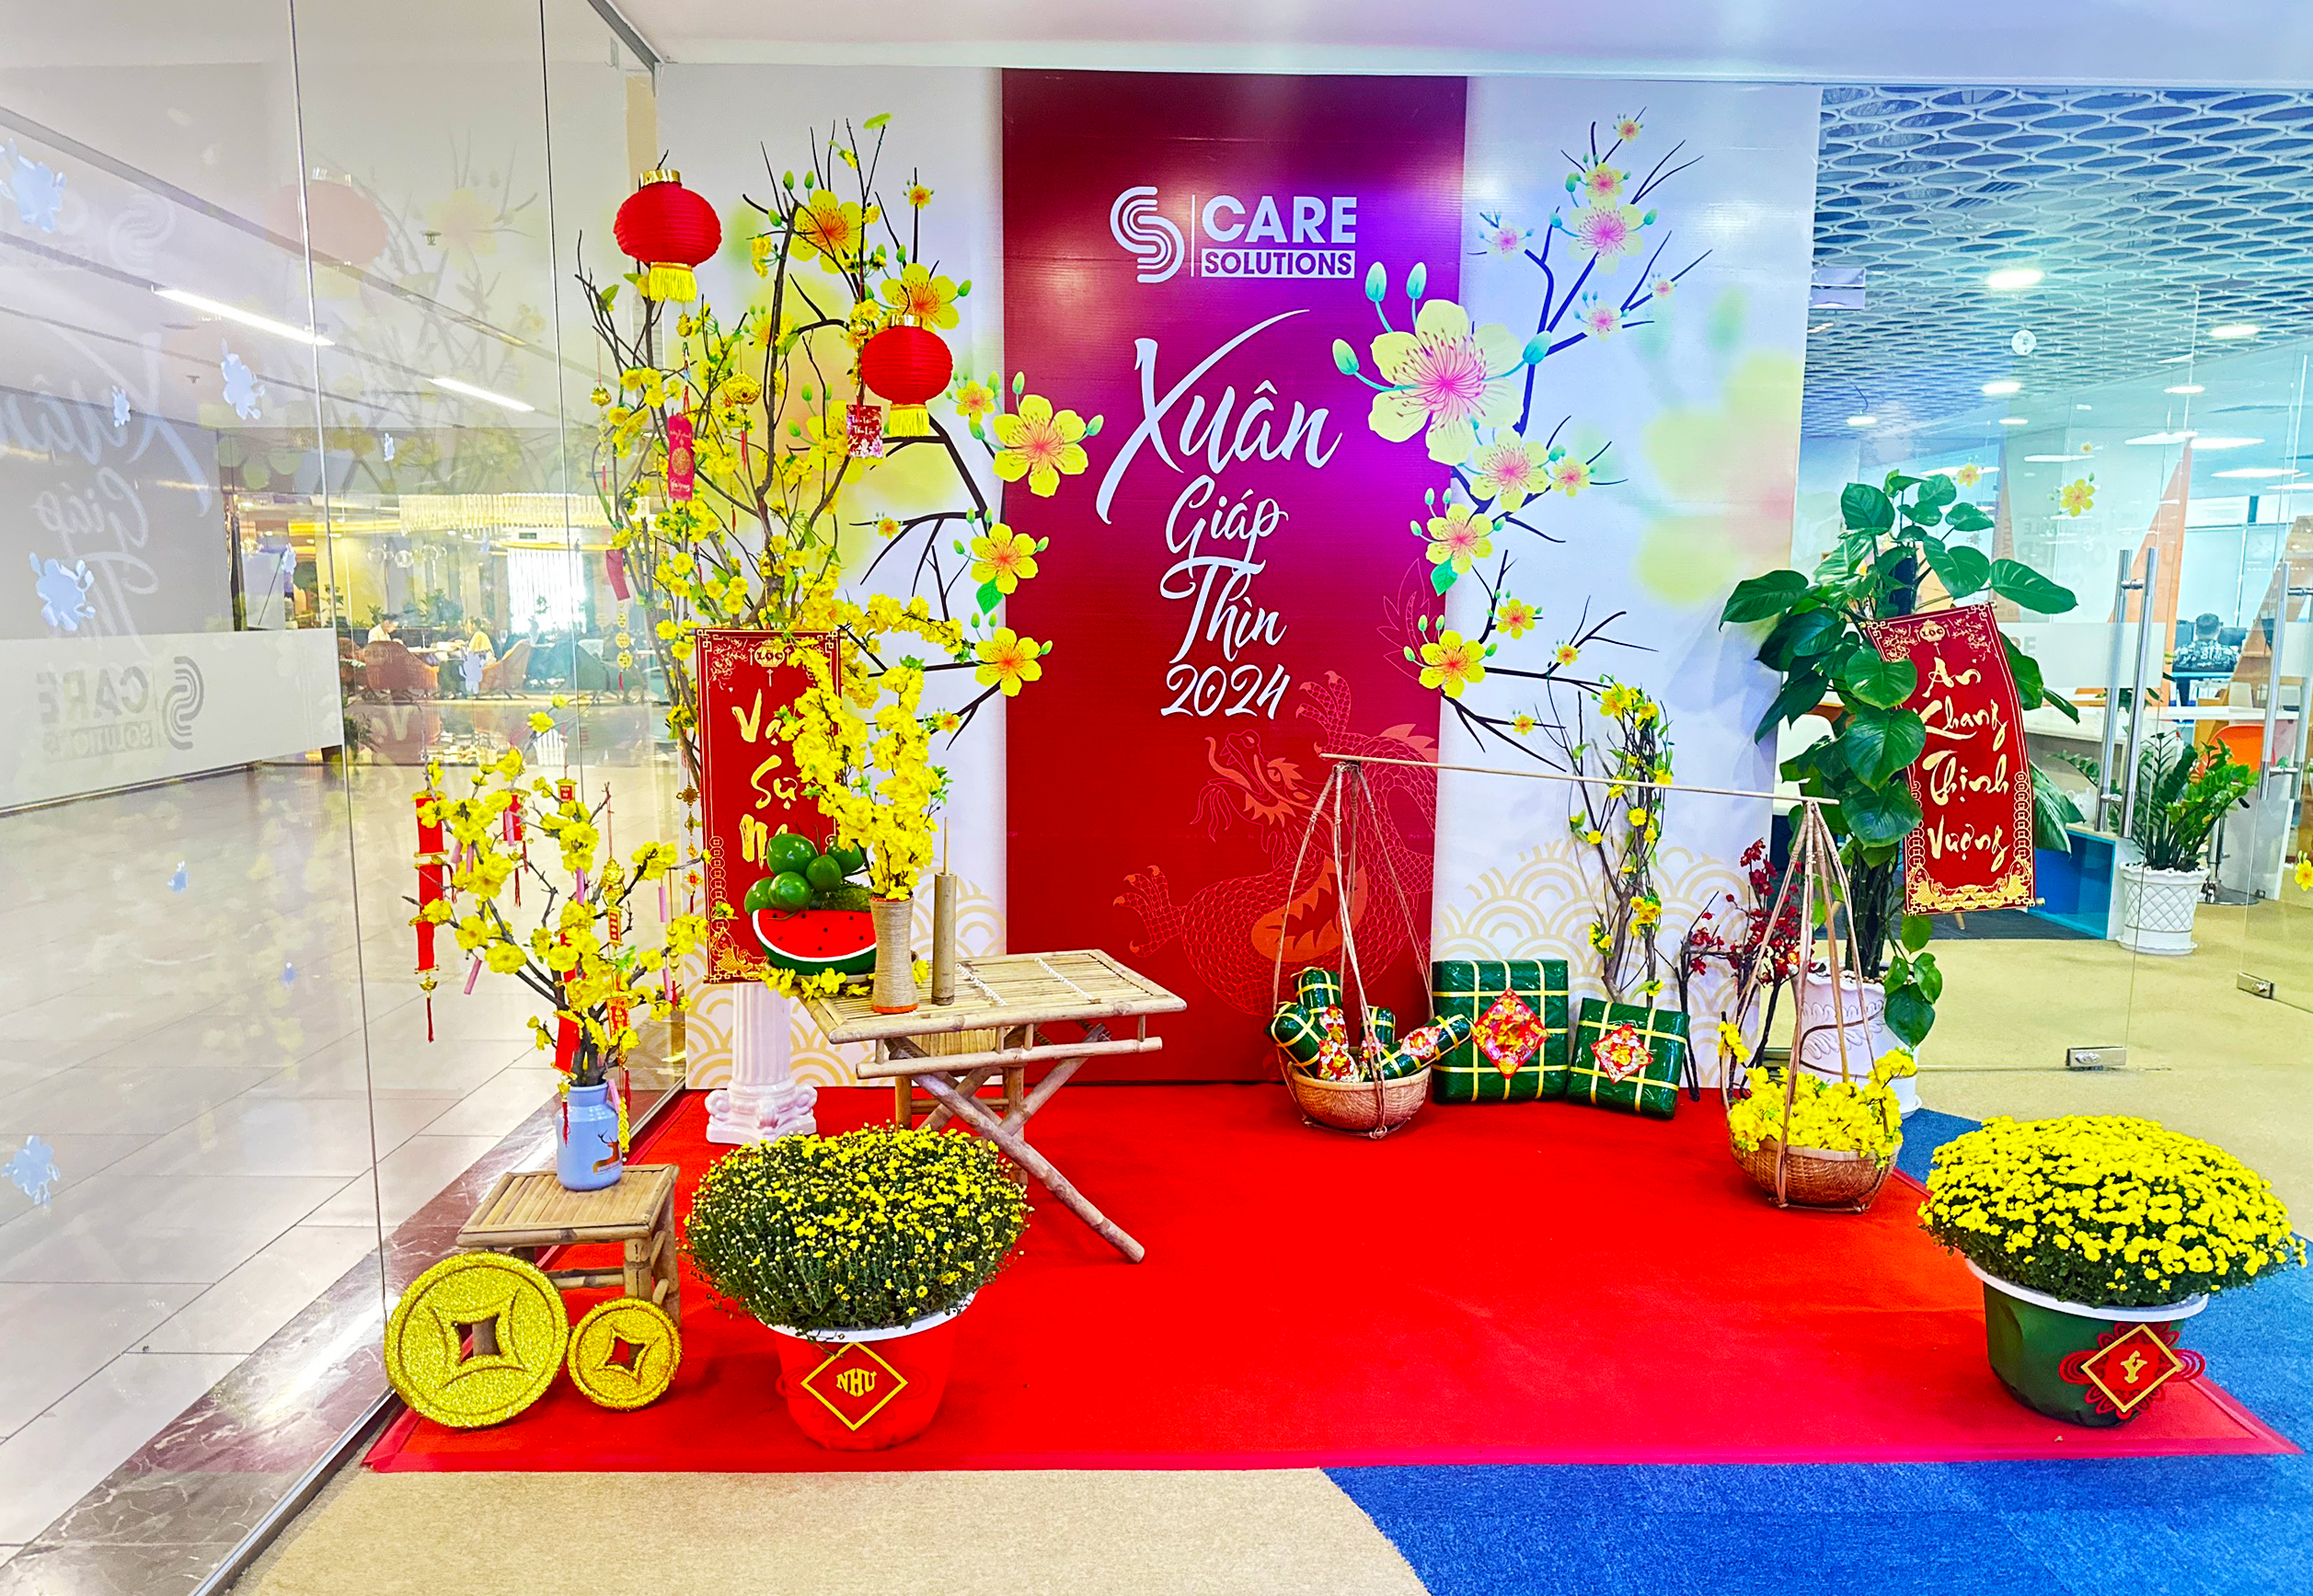 Happy Lunar New Year: A Delightful Tet Atmosphere At Care Vietnam